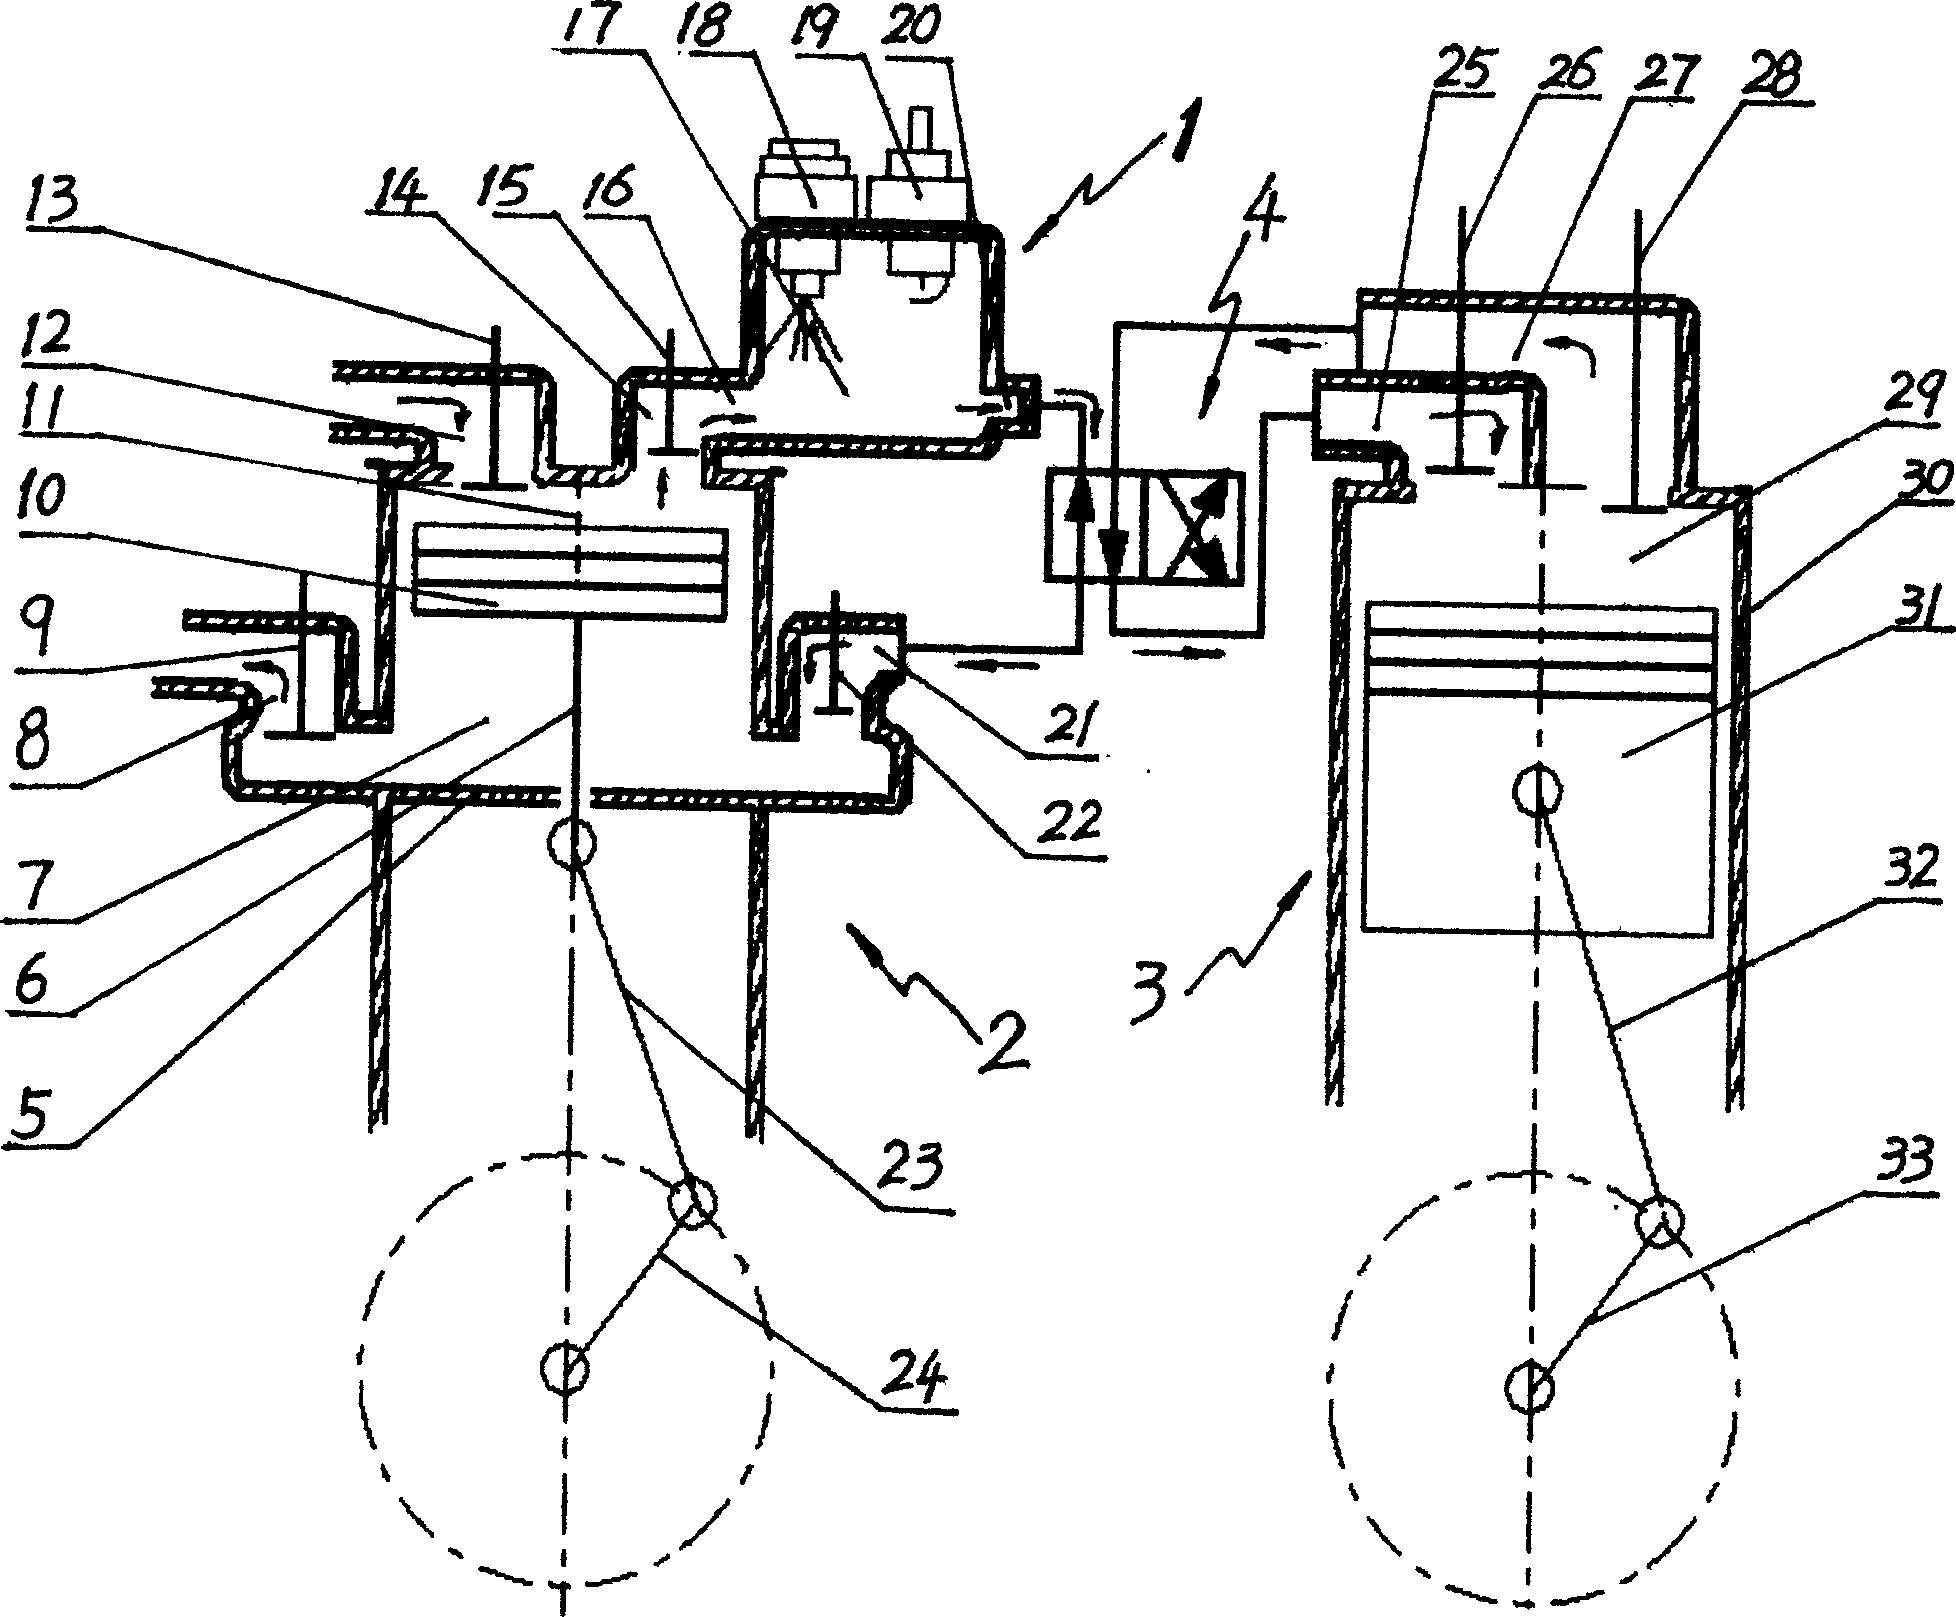 Continuous combustion constant power engine